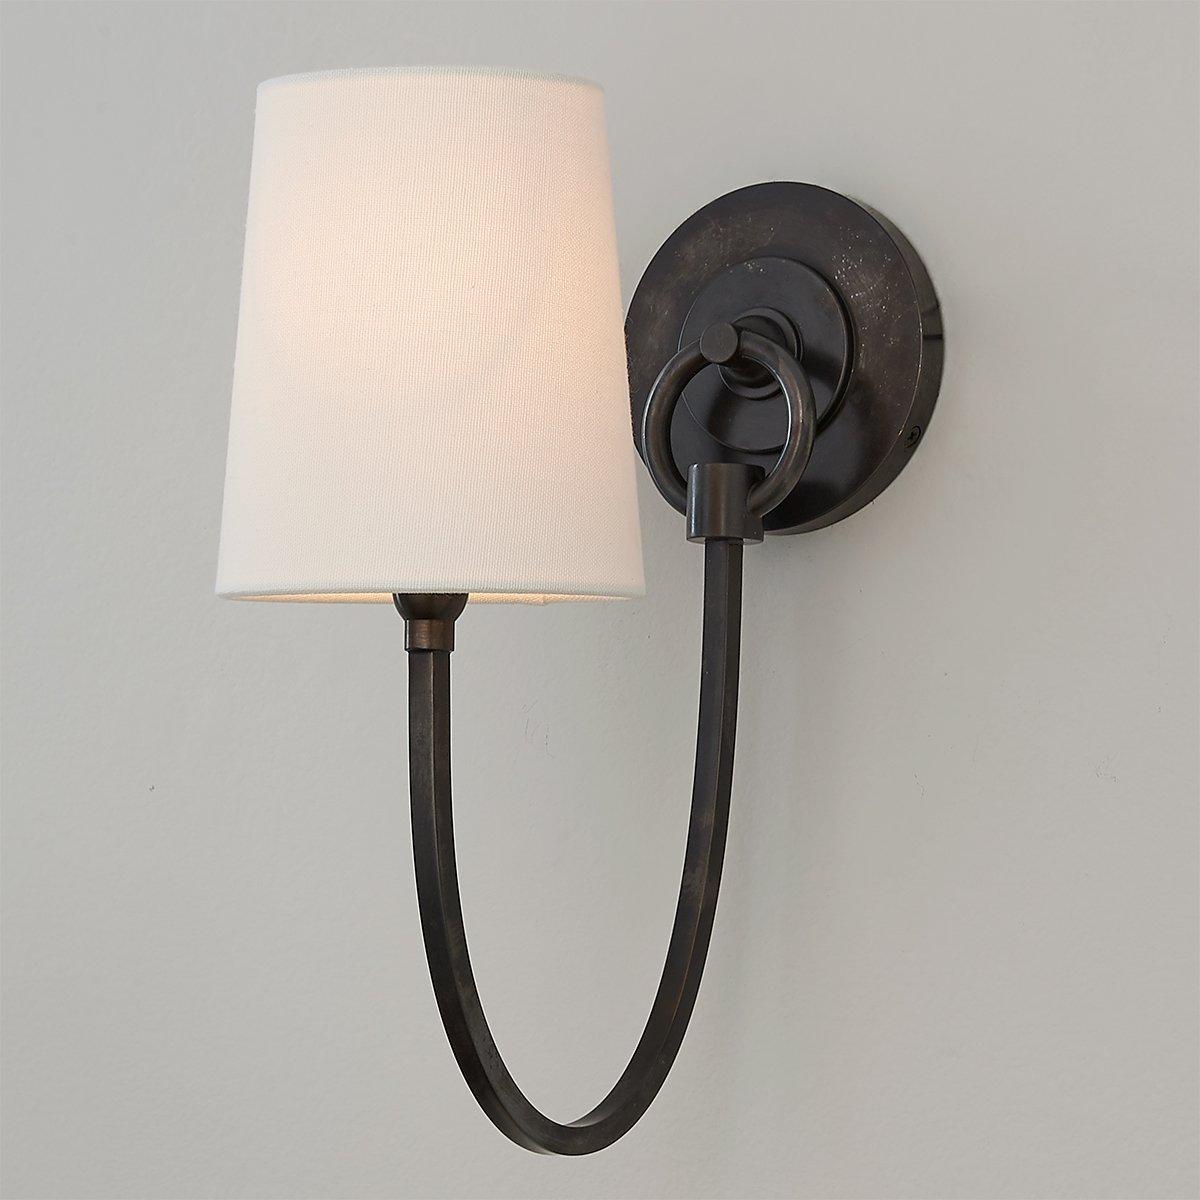 AERIN Brenta Single Sconce in Hand-Rubbed Antique Brass with White Gla